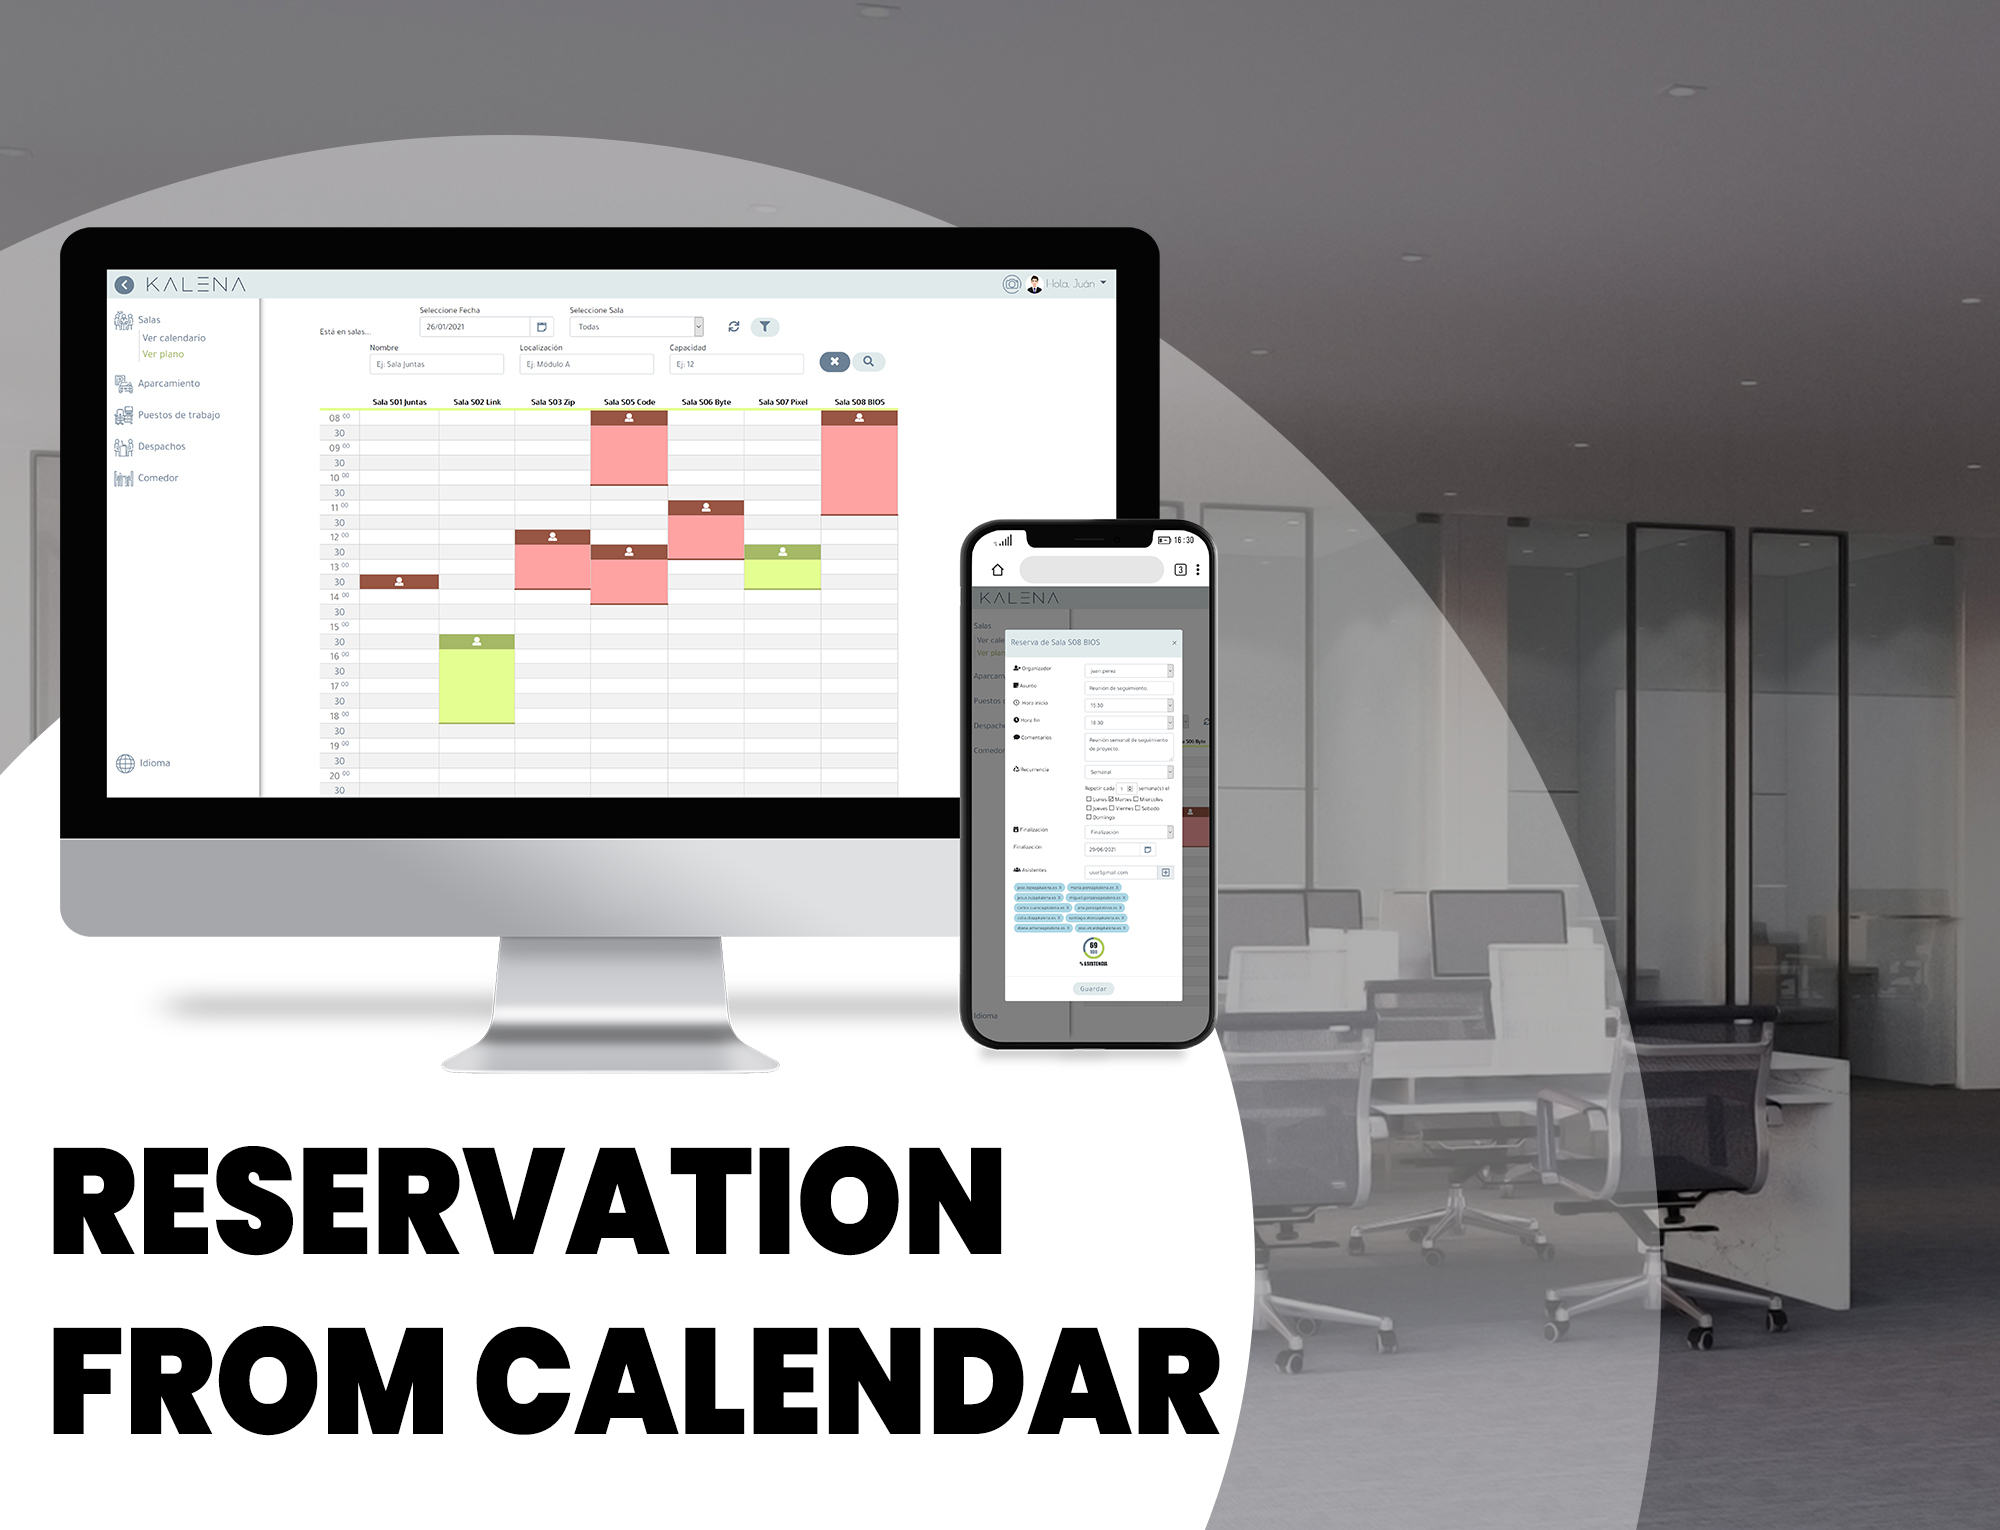 With Kalena you can also use the calendar view to book any space, and use different filters by date, location, capacity, etc.